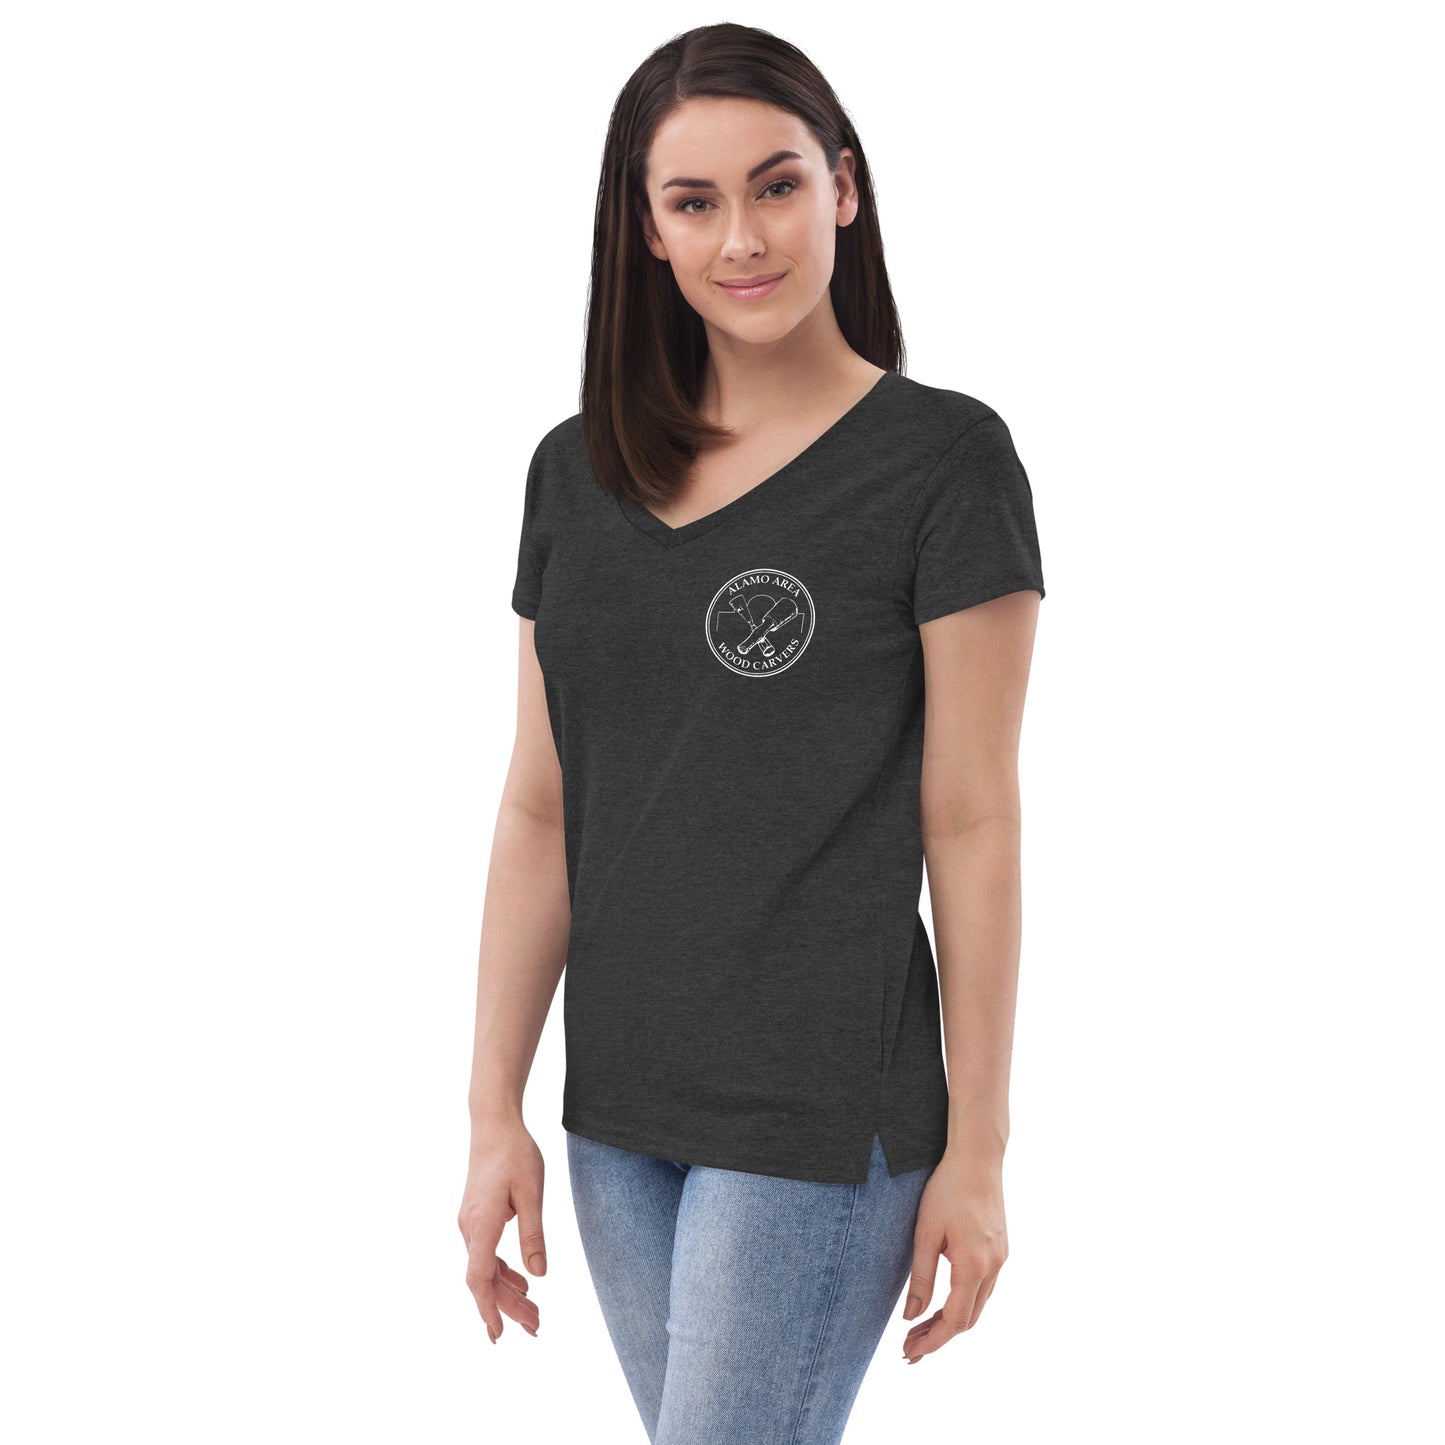 AAWC Front only logo Women’s recycled v-neck t-shirt